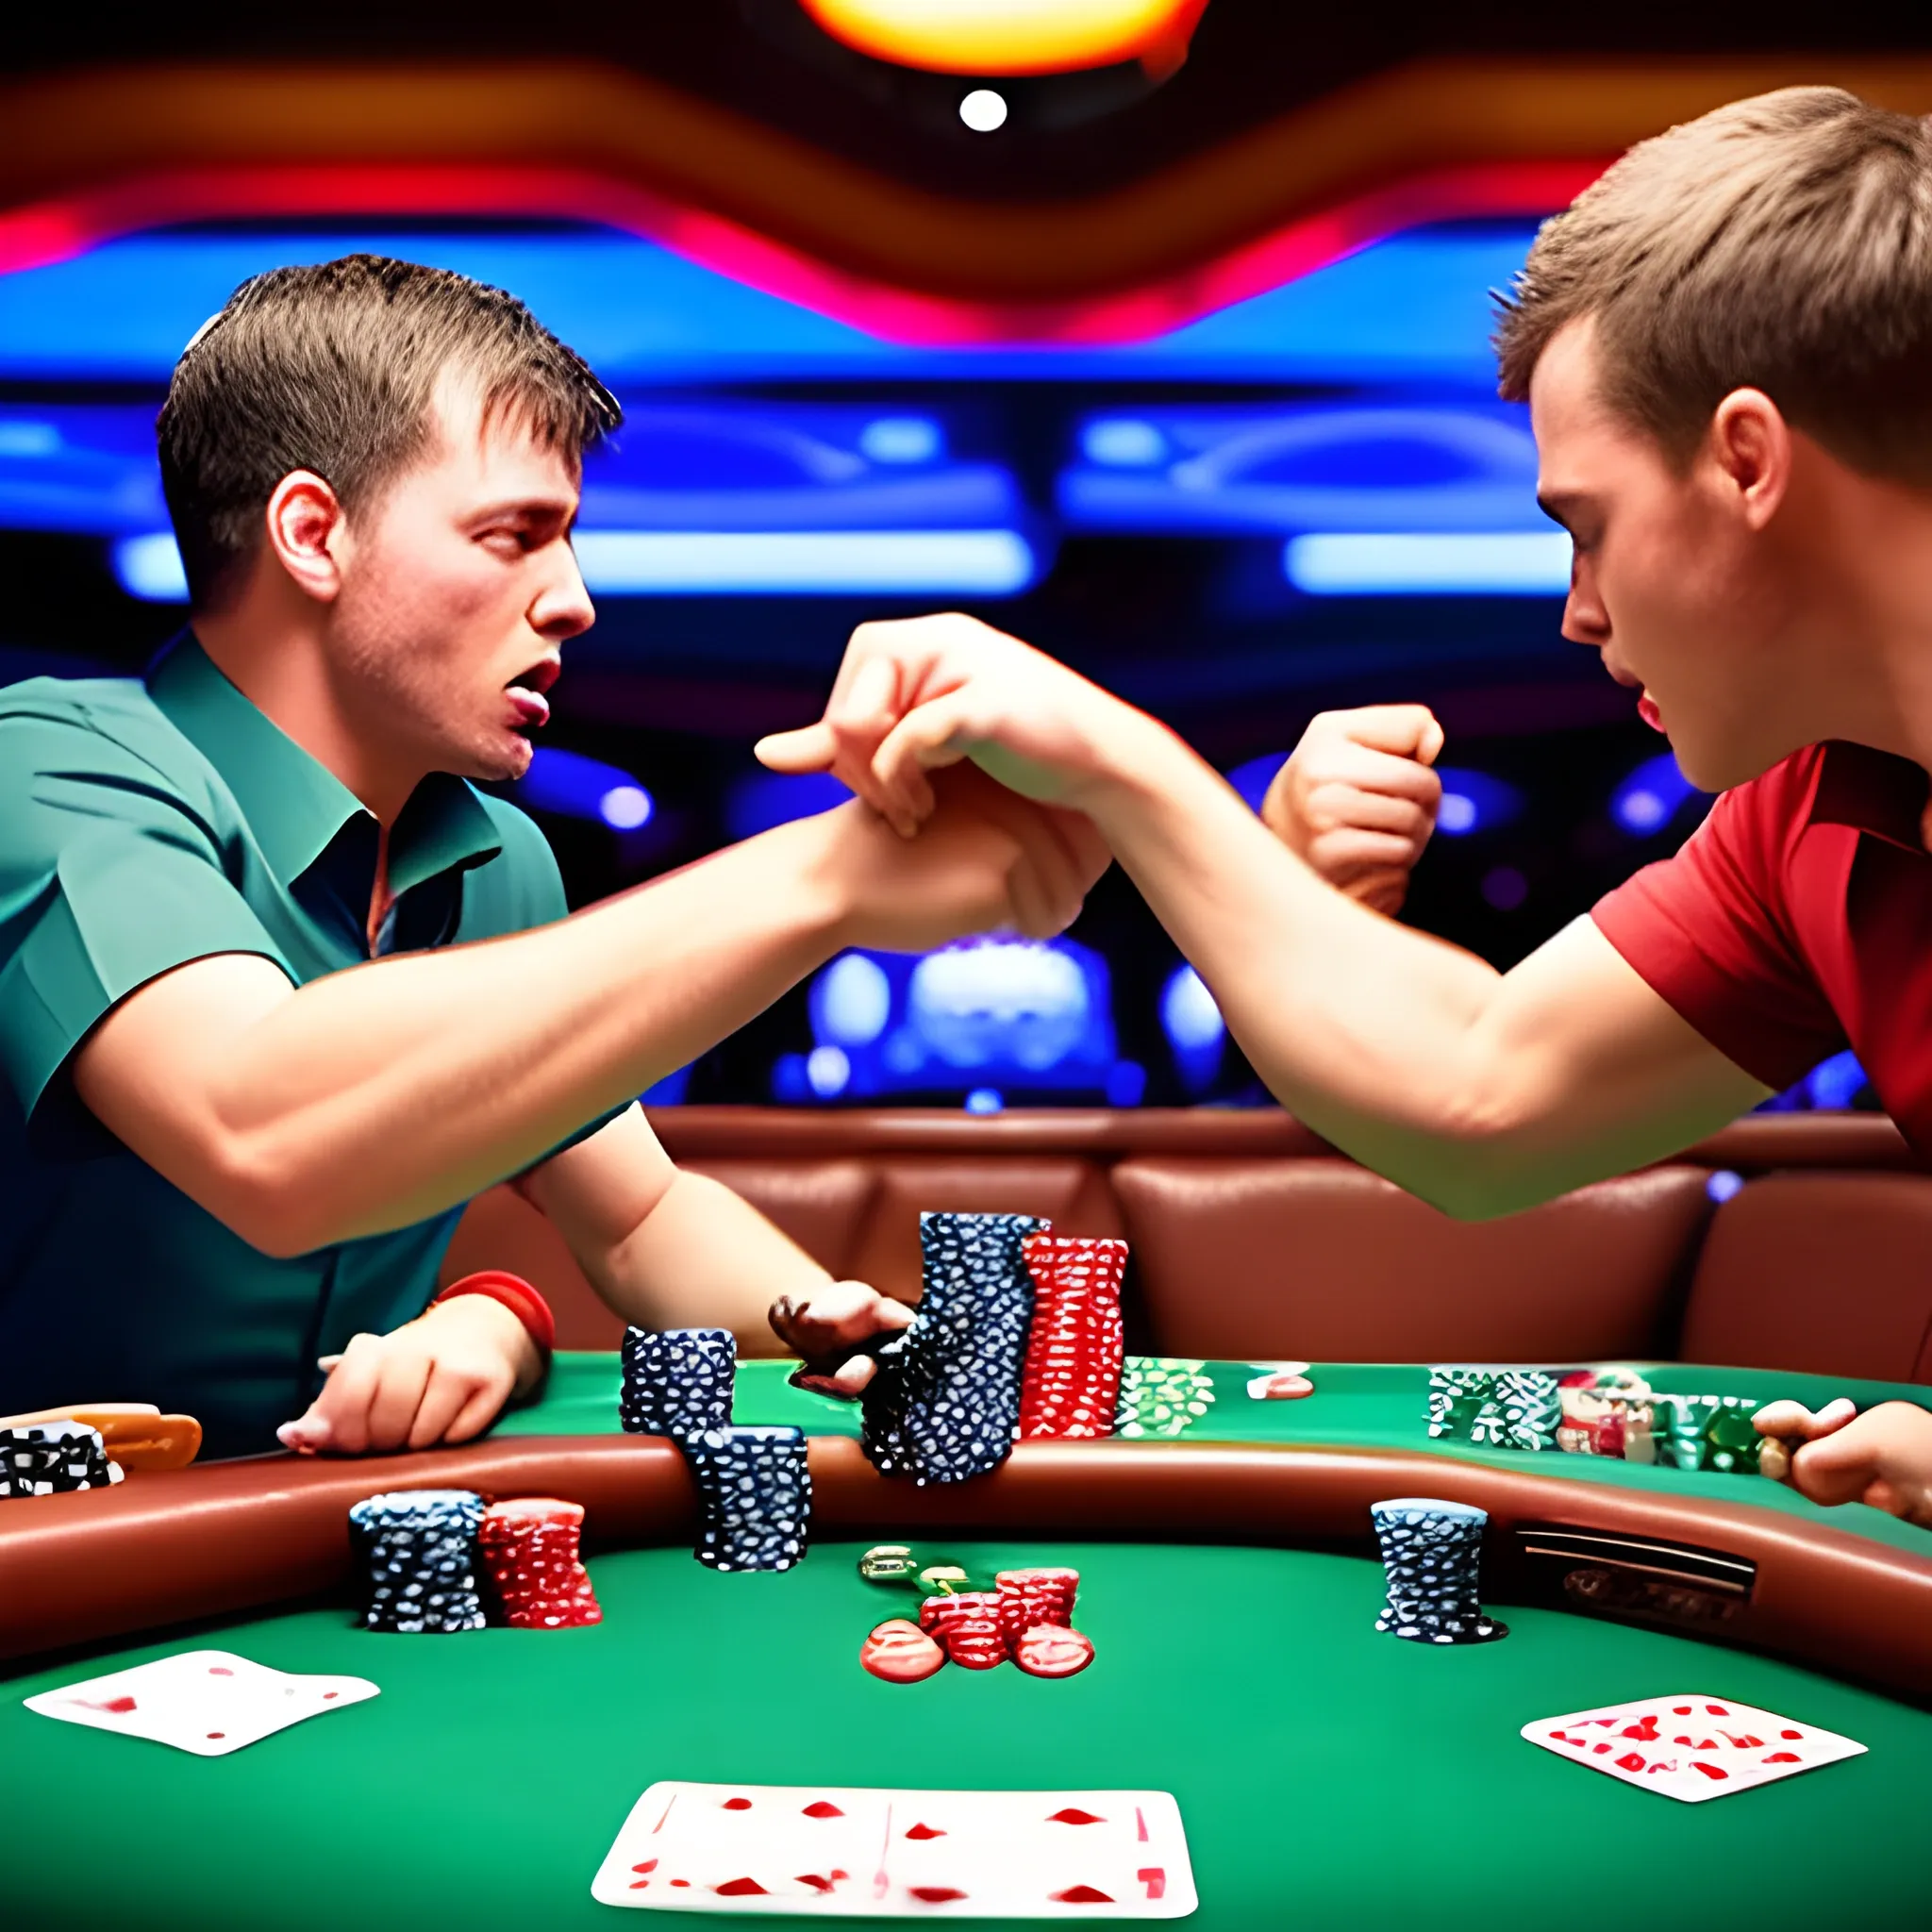 two drunk men fighting at a full poker table in a casino - Arthub.ai